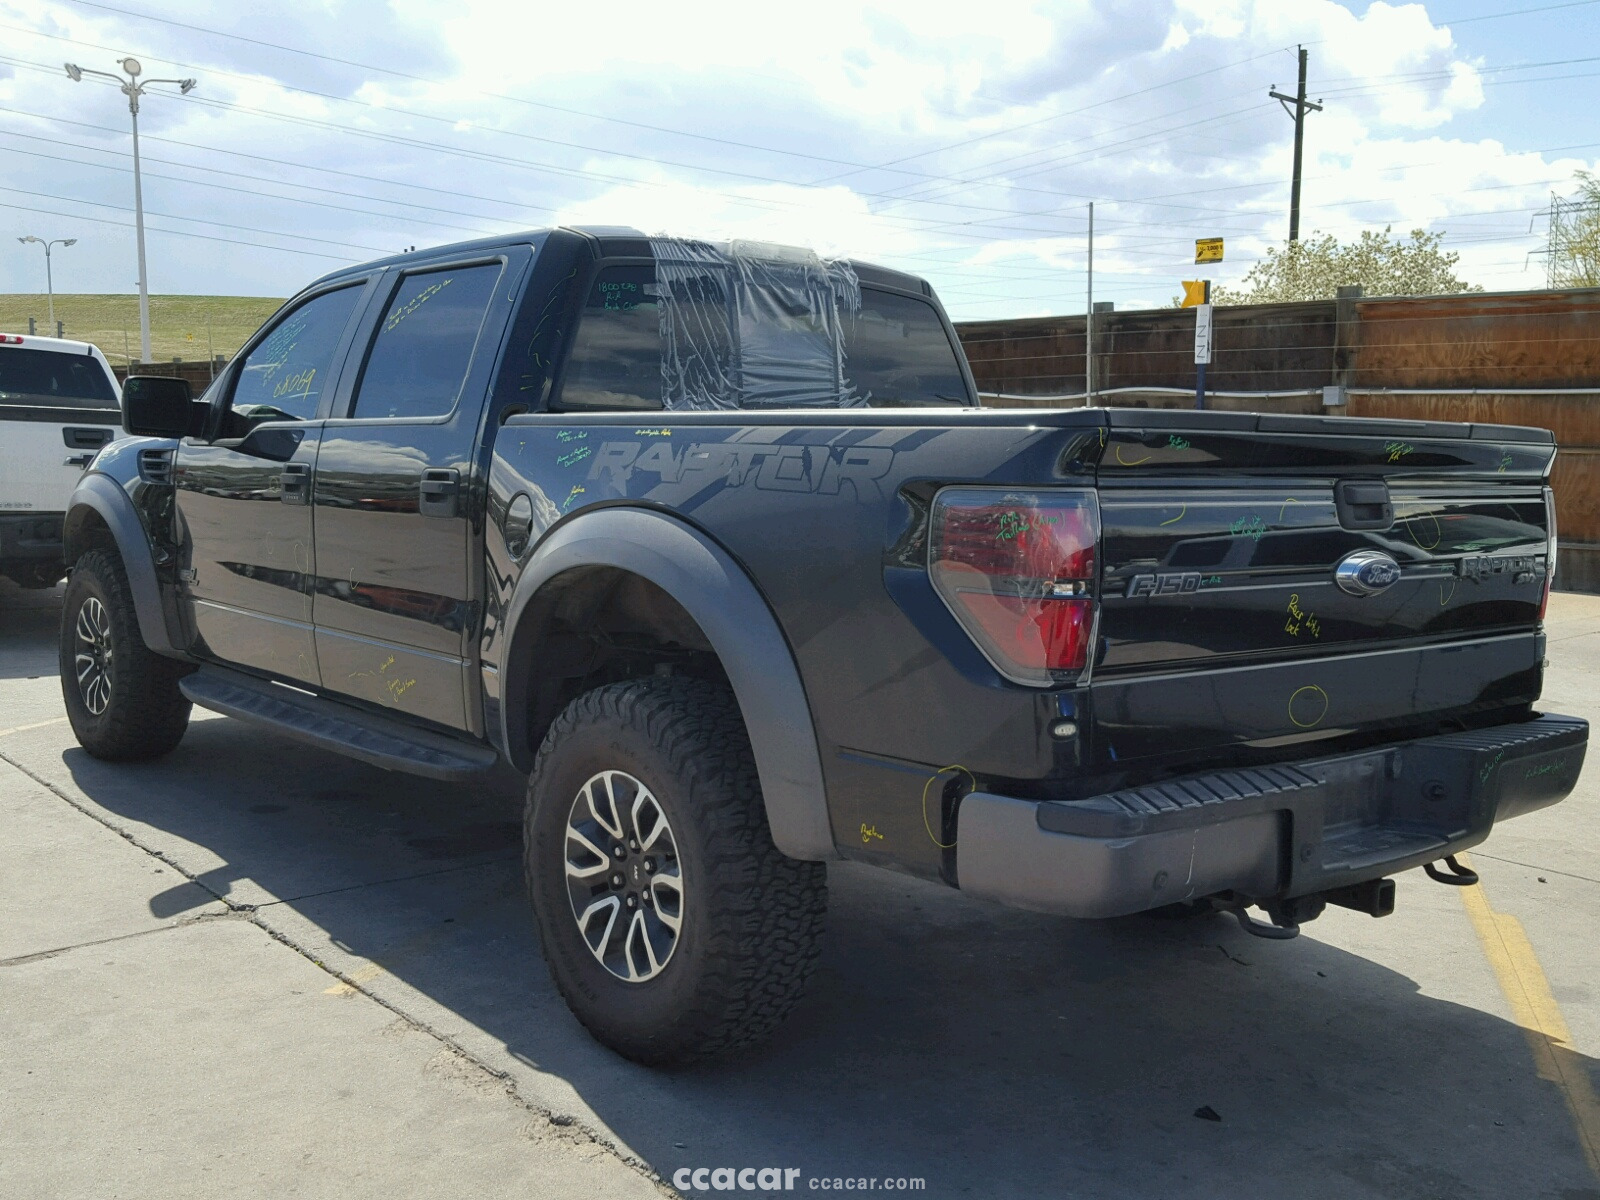 salvage title ford raptor for sale